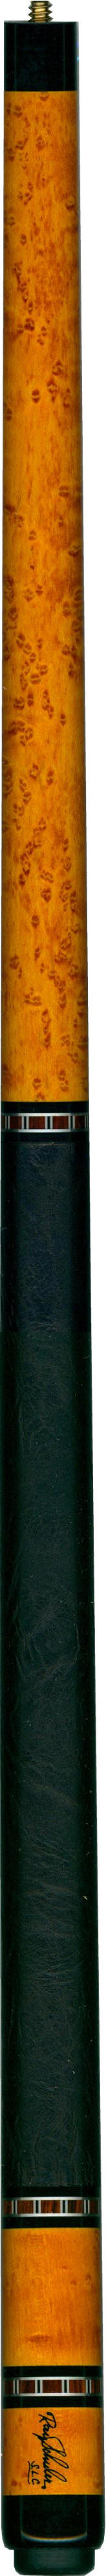 Ray Schuler PL-4 Pool Cue